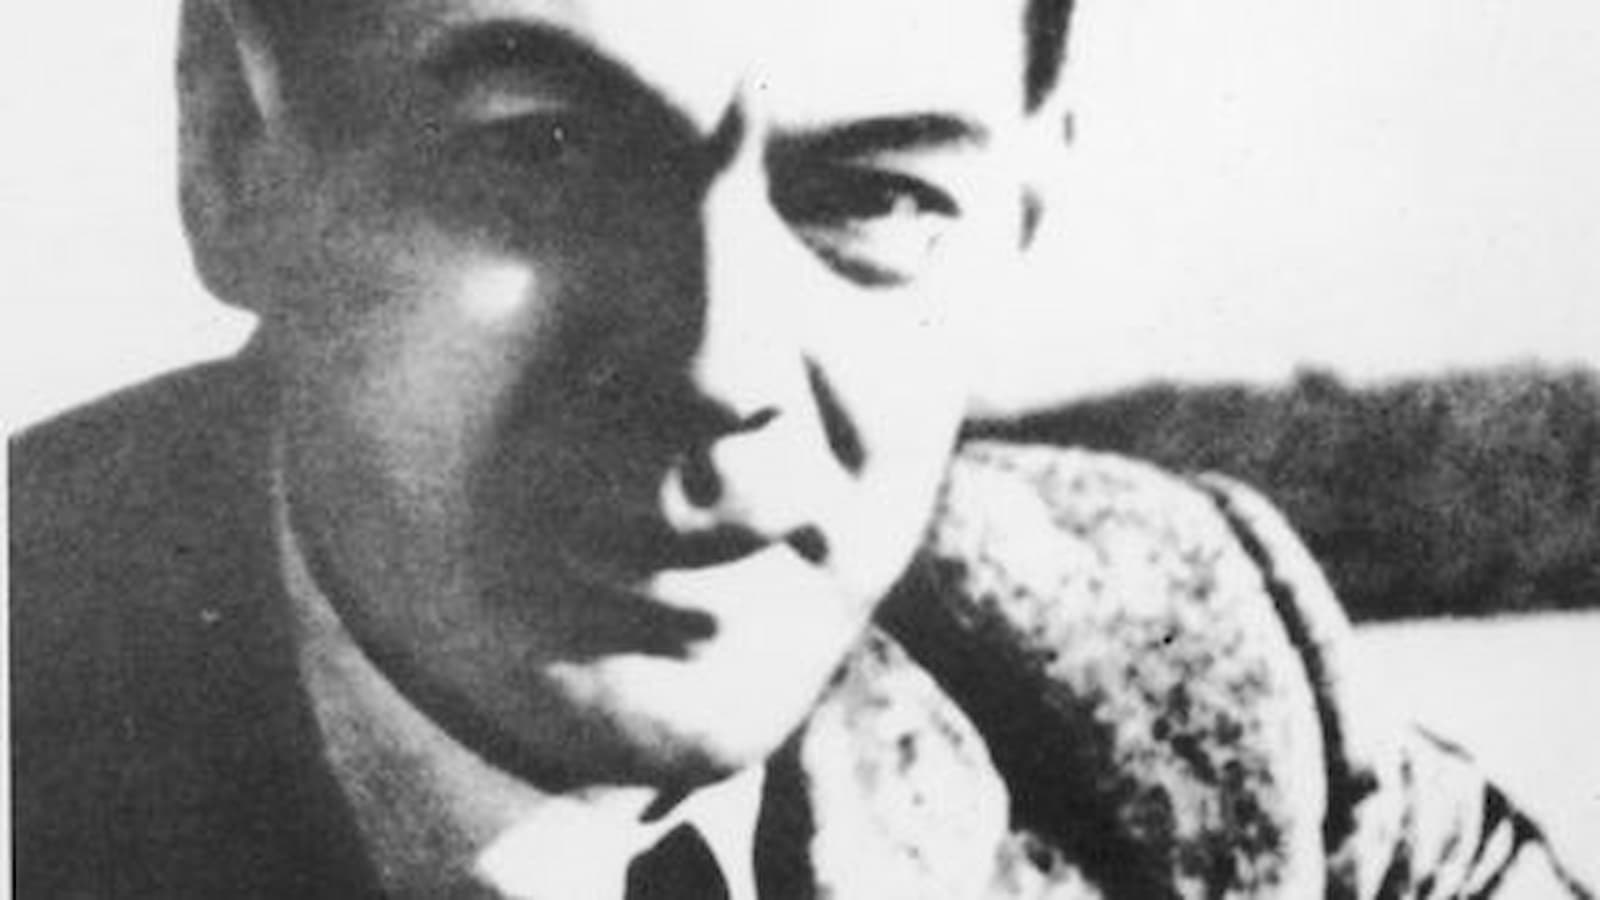 Who was the most feared spy during World War II?